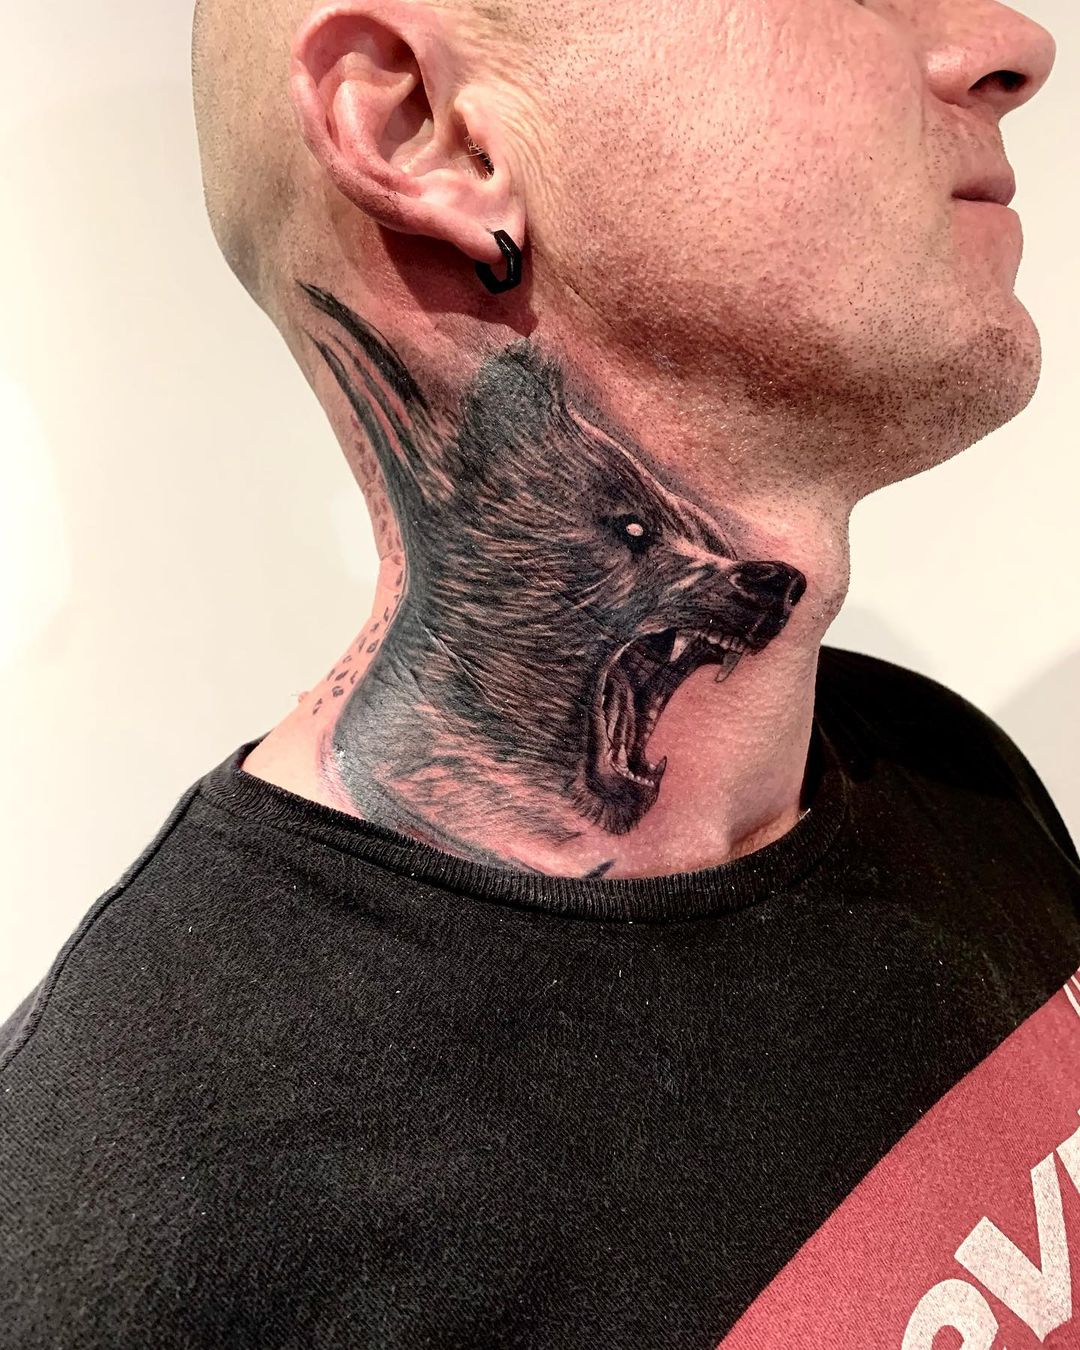 Make sure that you know of an amazing tattoo artist before you commit to this neck tattoo.